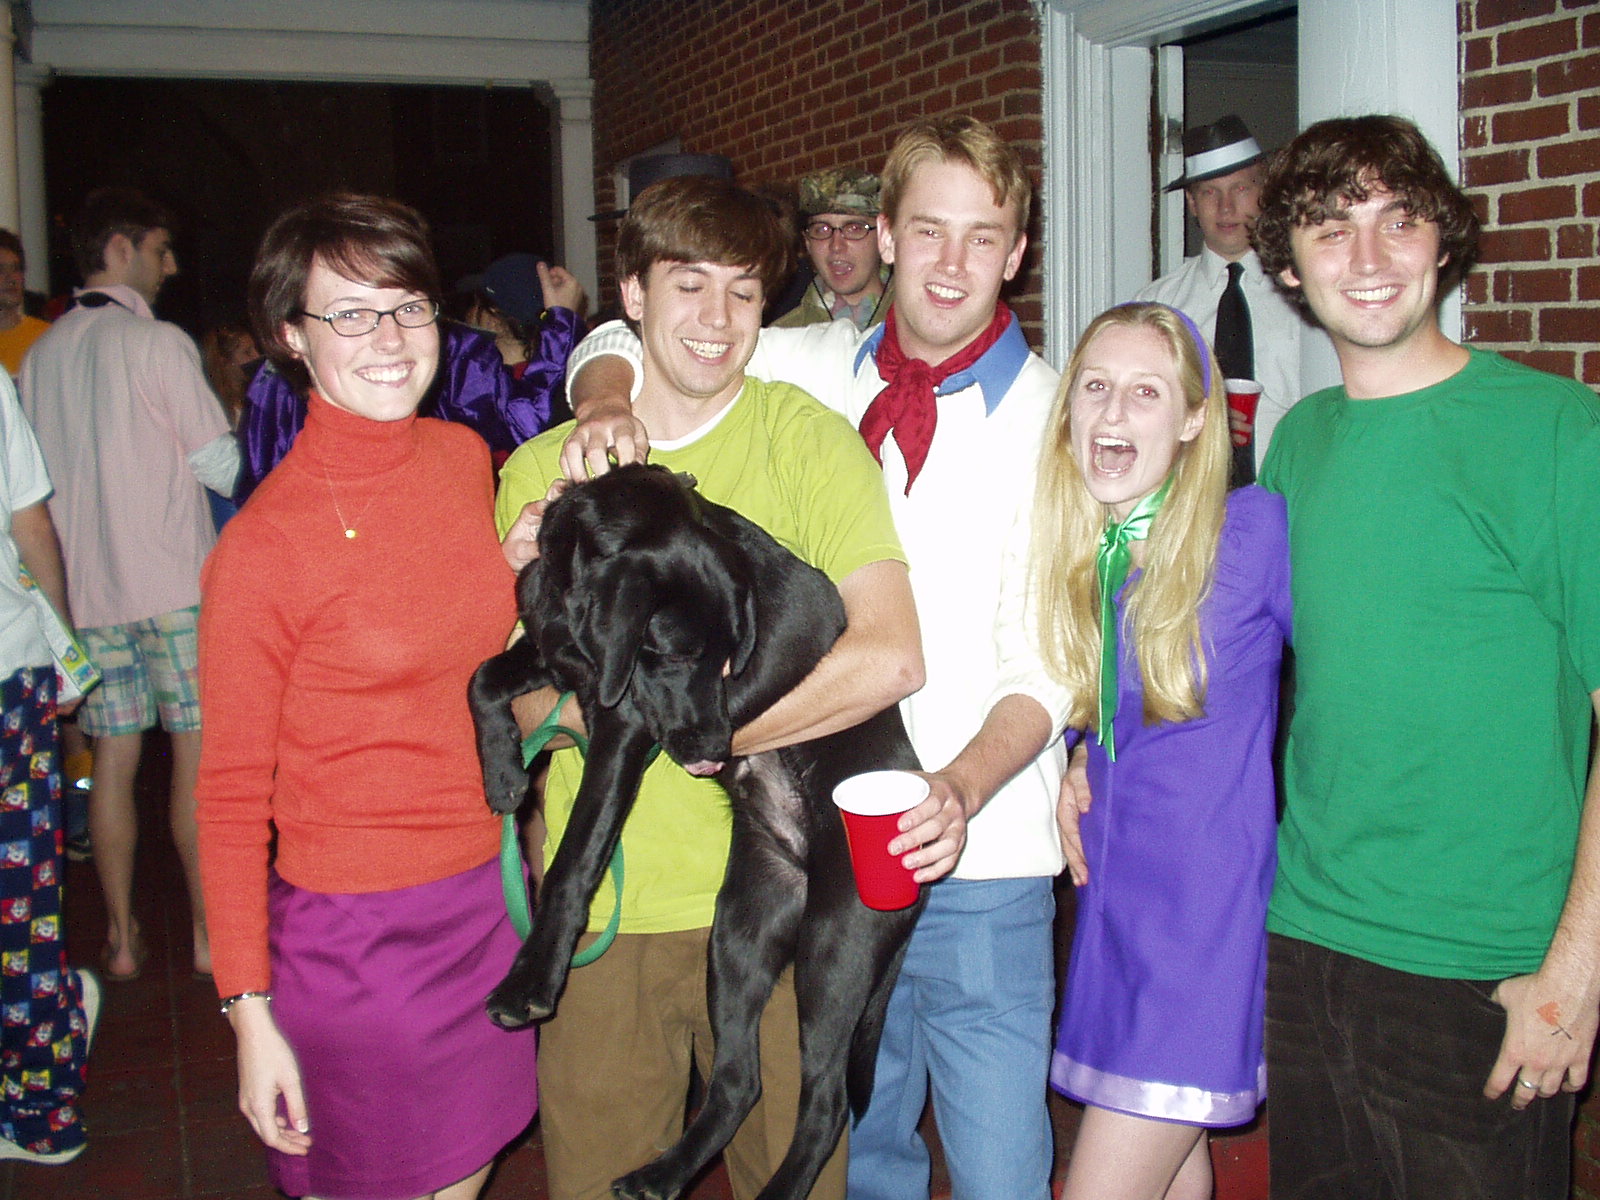 Scooby Doo Daphne And Velma Dress Up Games